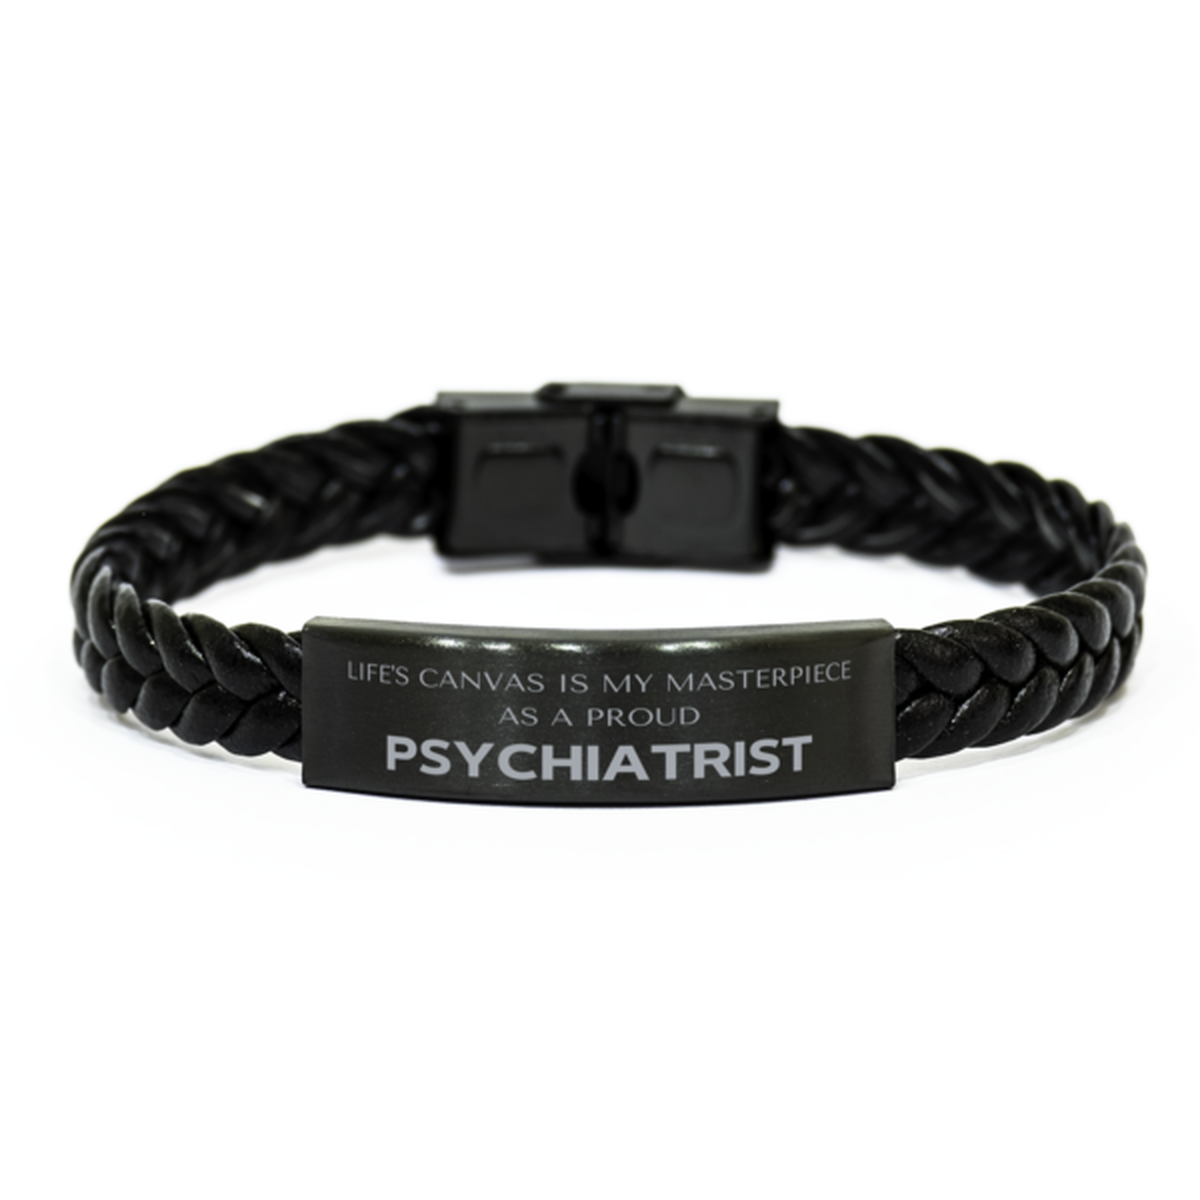 Proud Psychiatrist Gifts, Life's canvas is my masterpiece, Epic Birthday Christmas Unique Braided Leather Bracelet For Psychiatrist, Coworkers, Men, Women, Friends